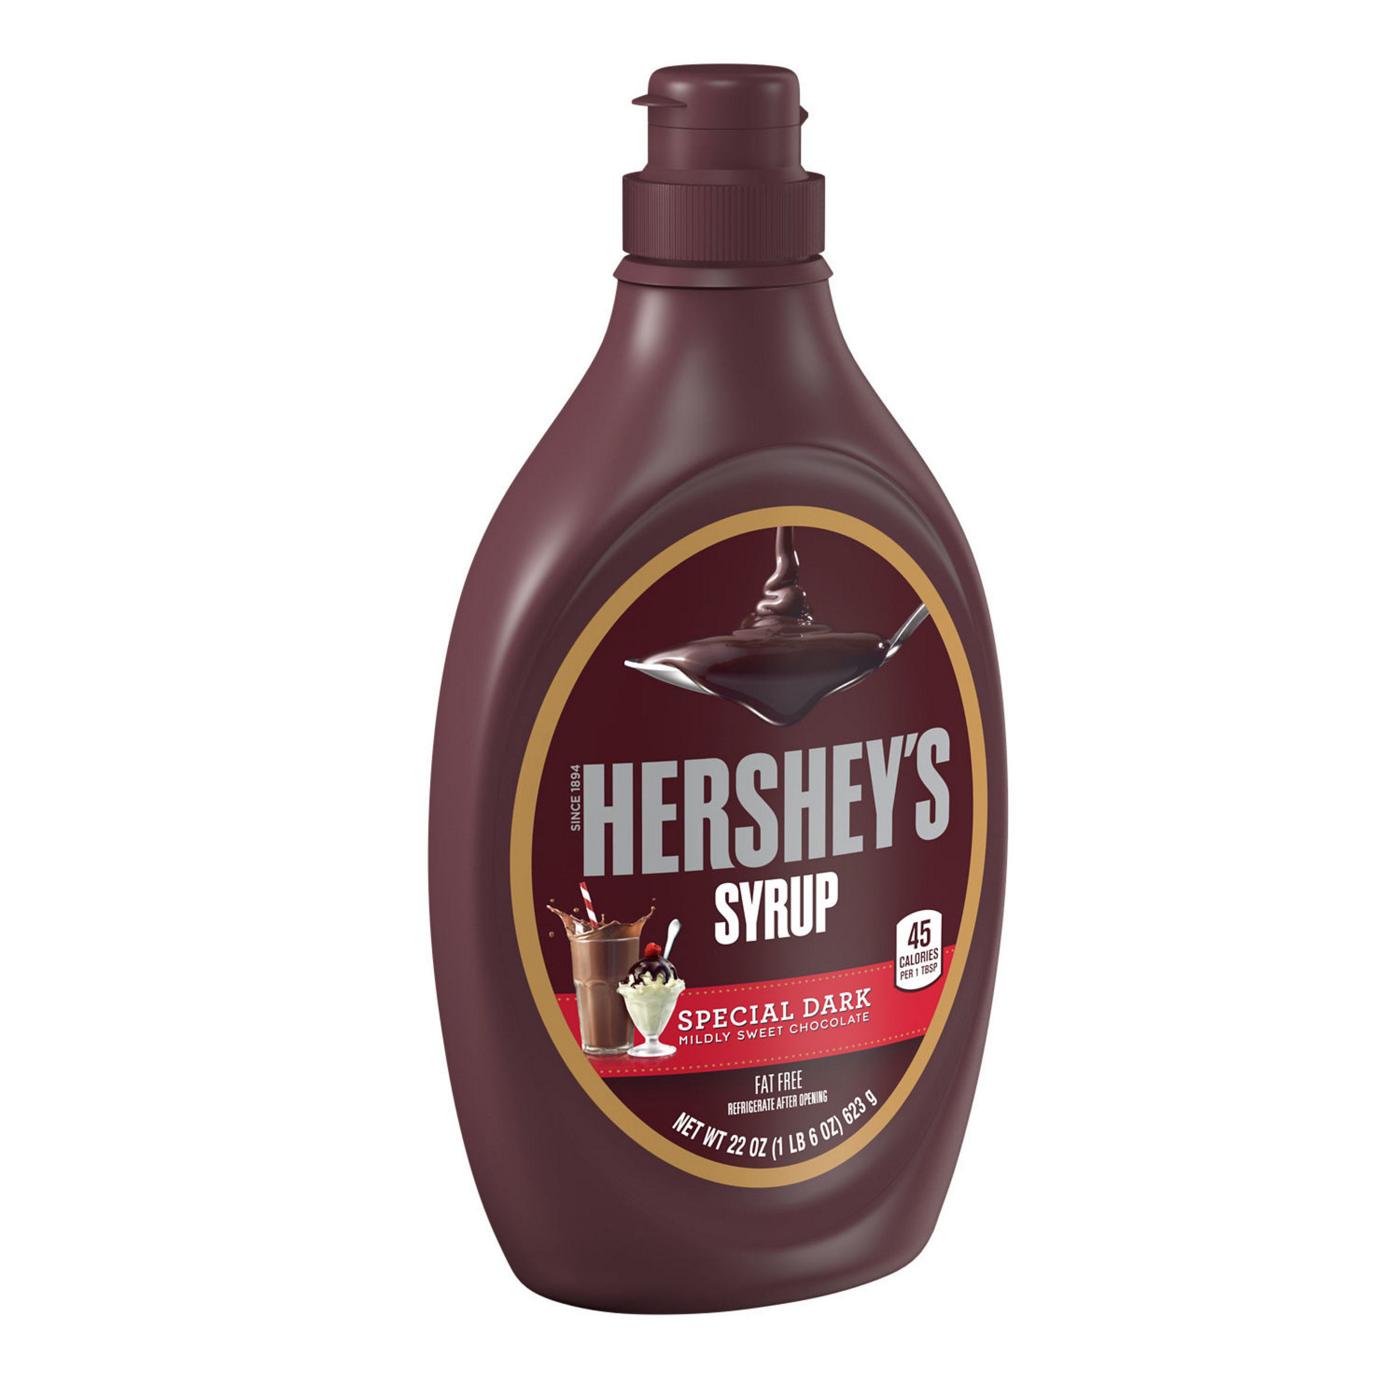 Hershey's Special Dark Chocolate Syrup; image 4 of 6